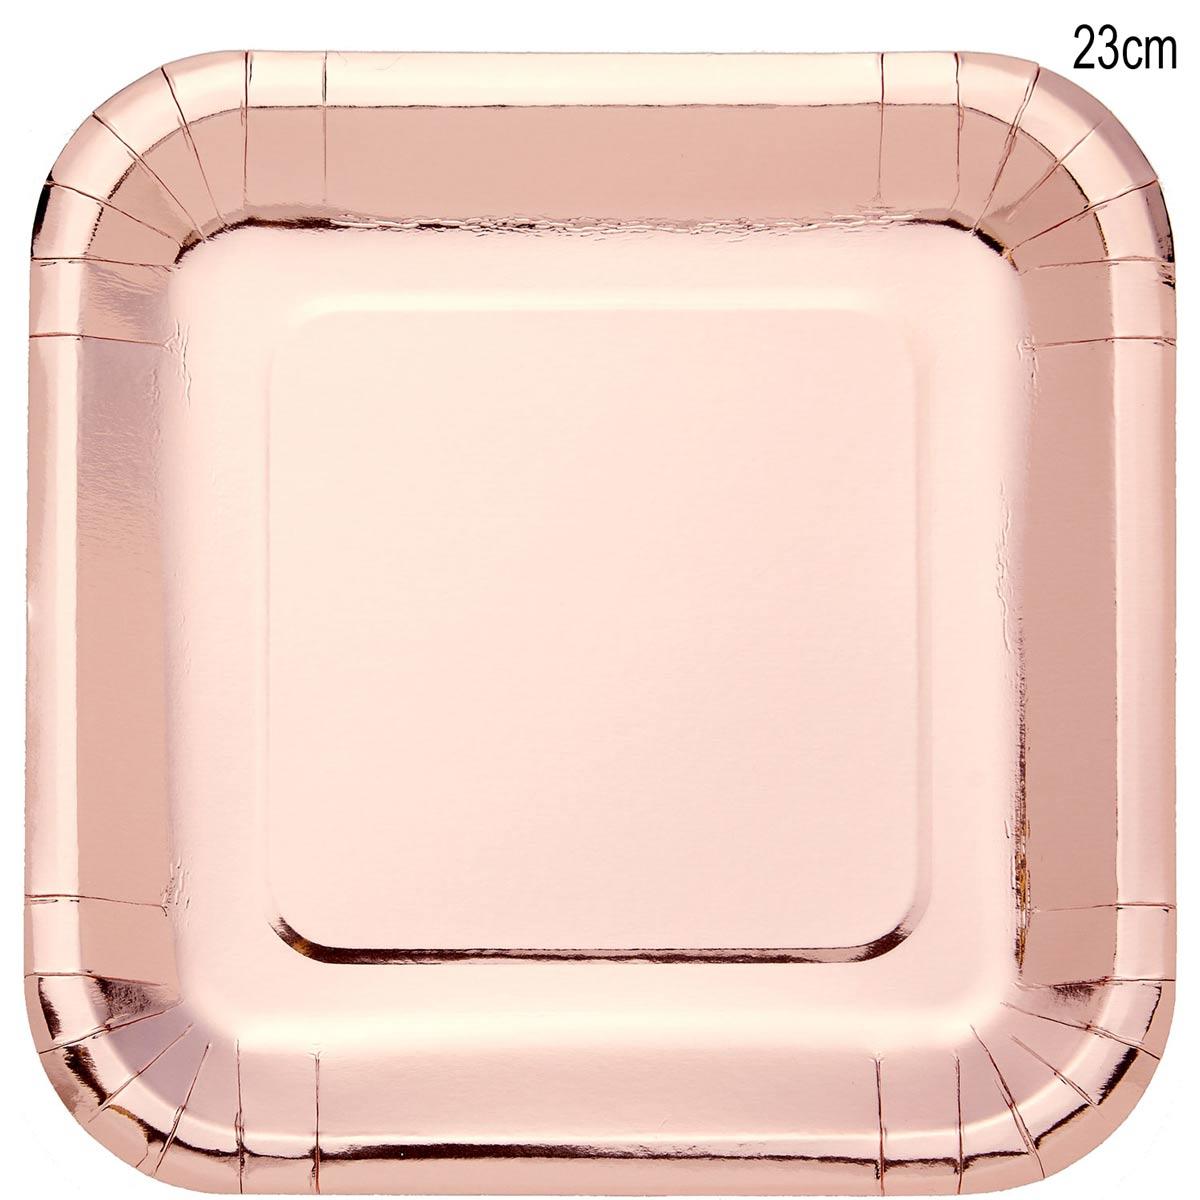 Pack 8 Metallic Rose Gold Square 23cm Paper Dinner Plates by Amscan 9908651 available here at Karnival Costumes online party shop